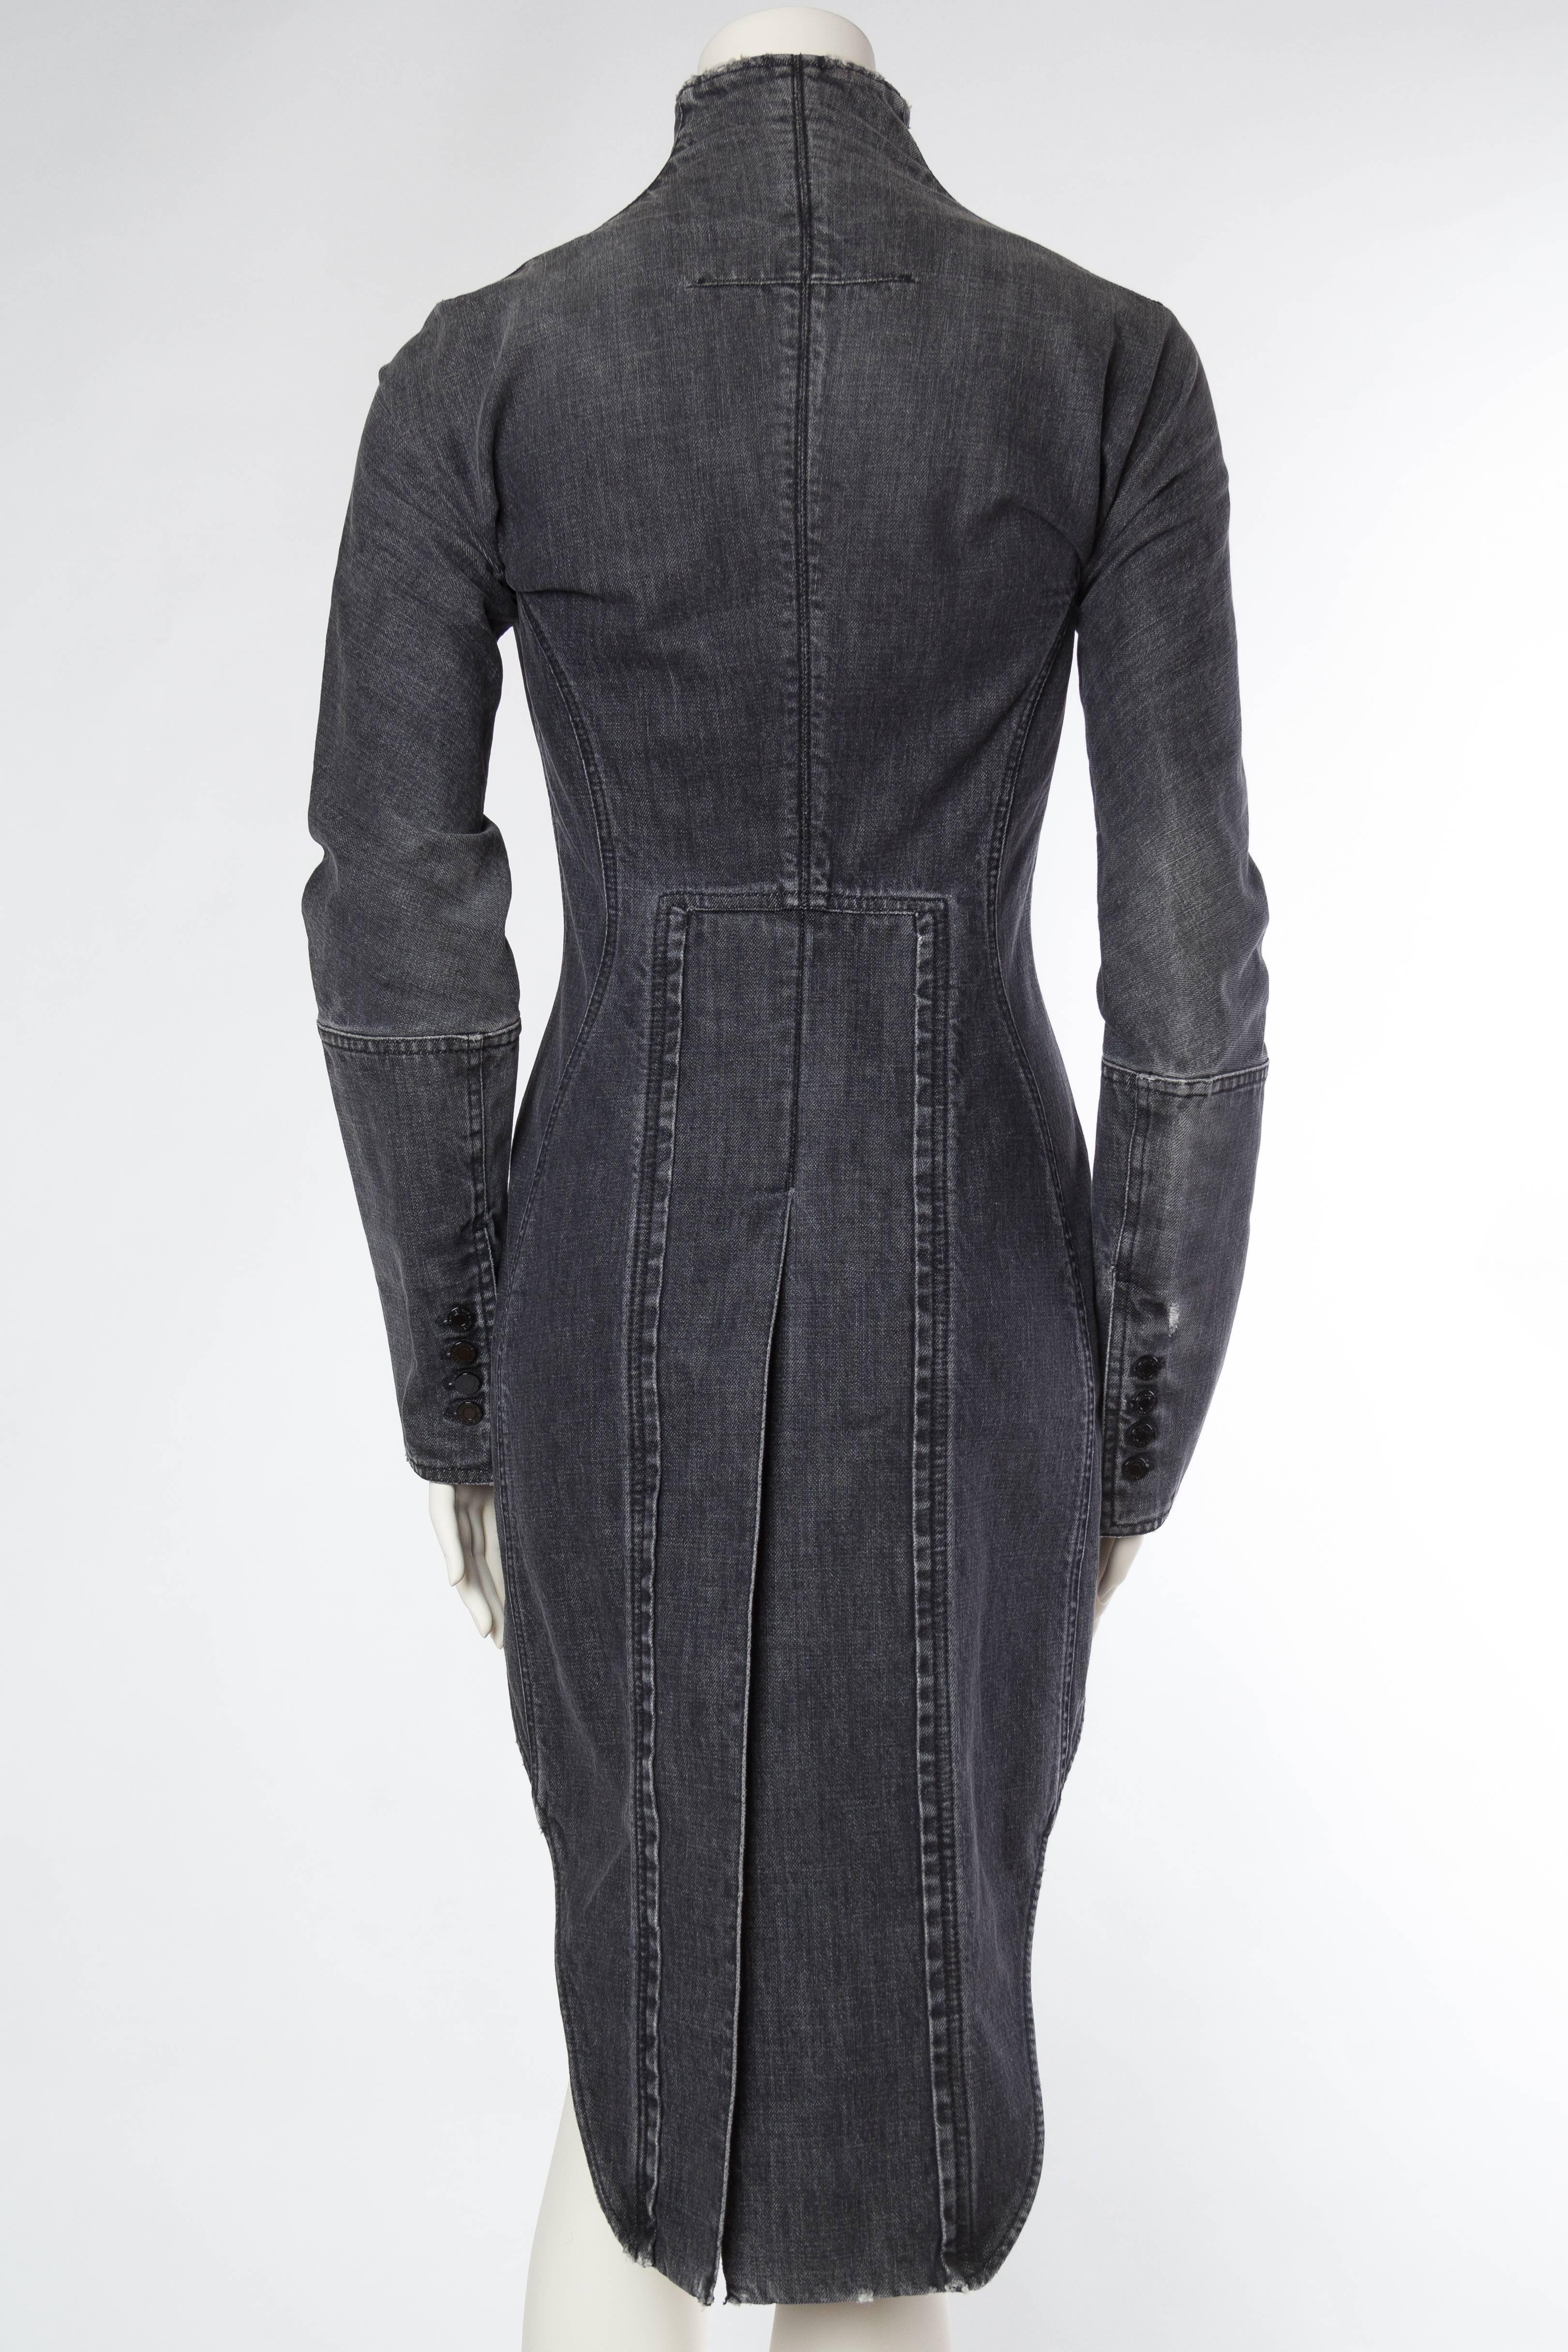 Women's Victorian Style Givenchy Distressed Denim Frock Coat